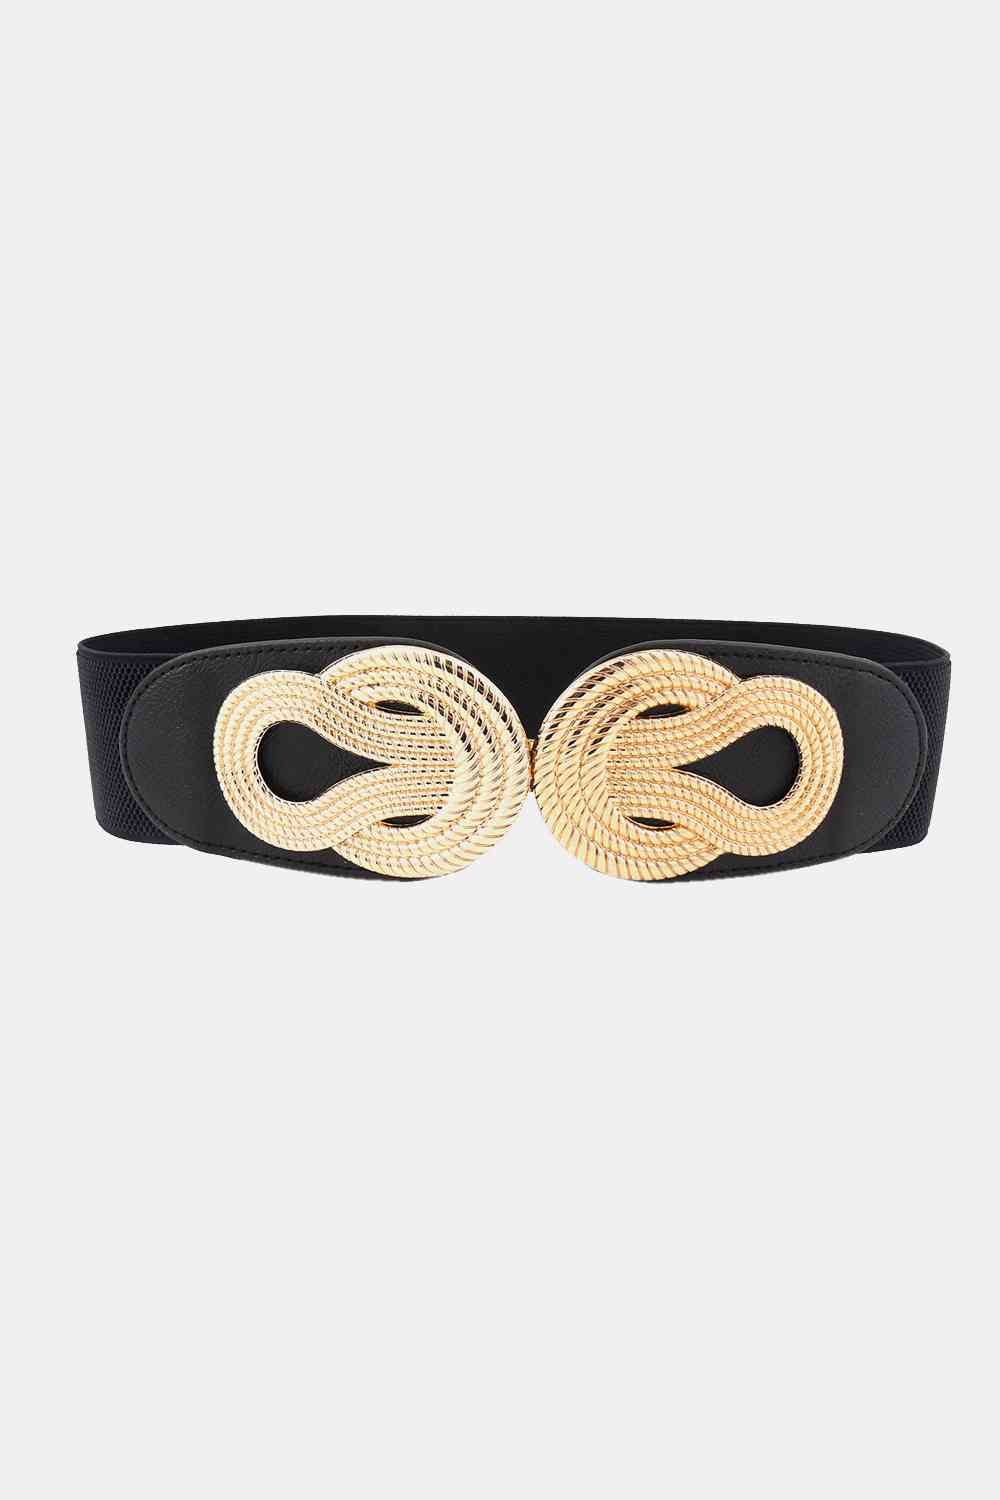 Twisted Alloy Buckle Wide Belt Black One Size